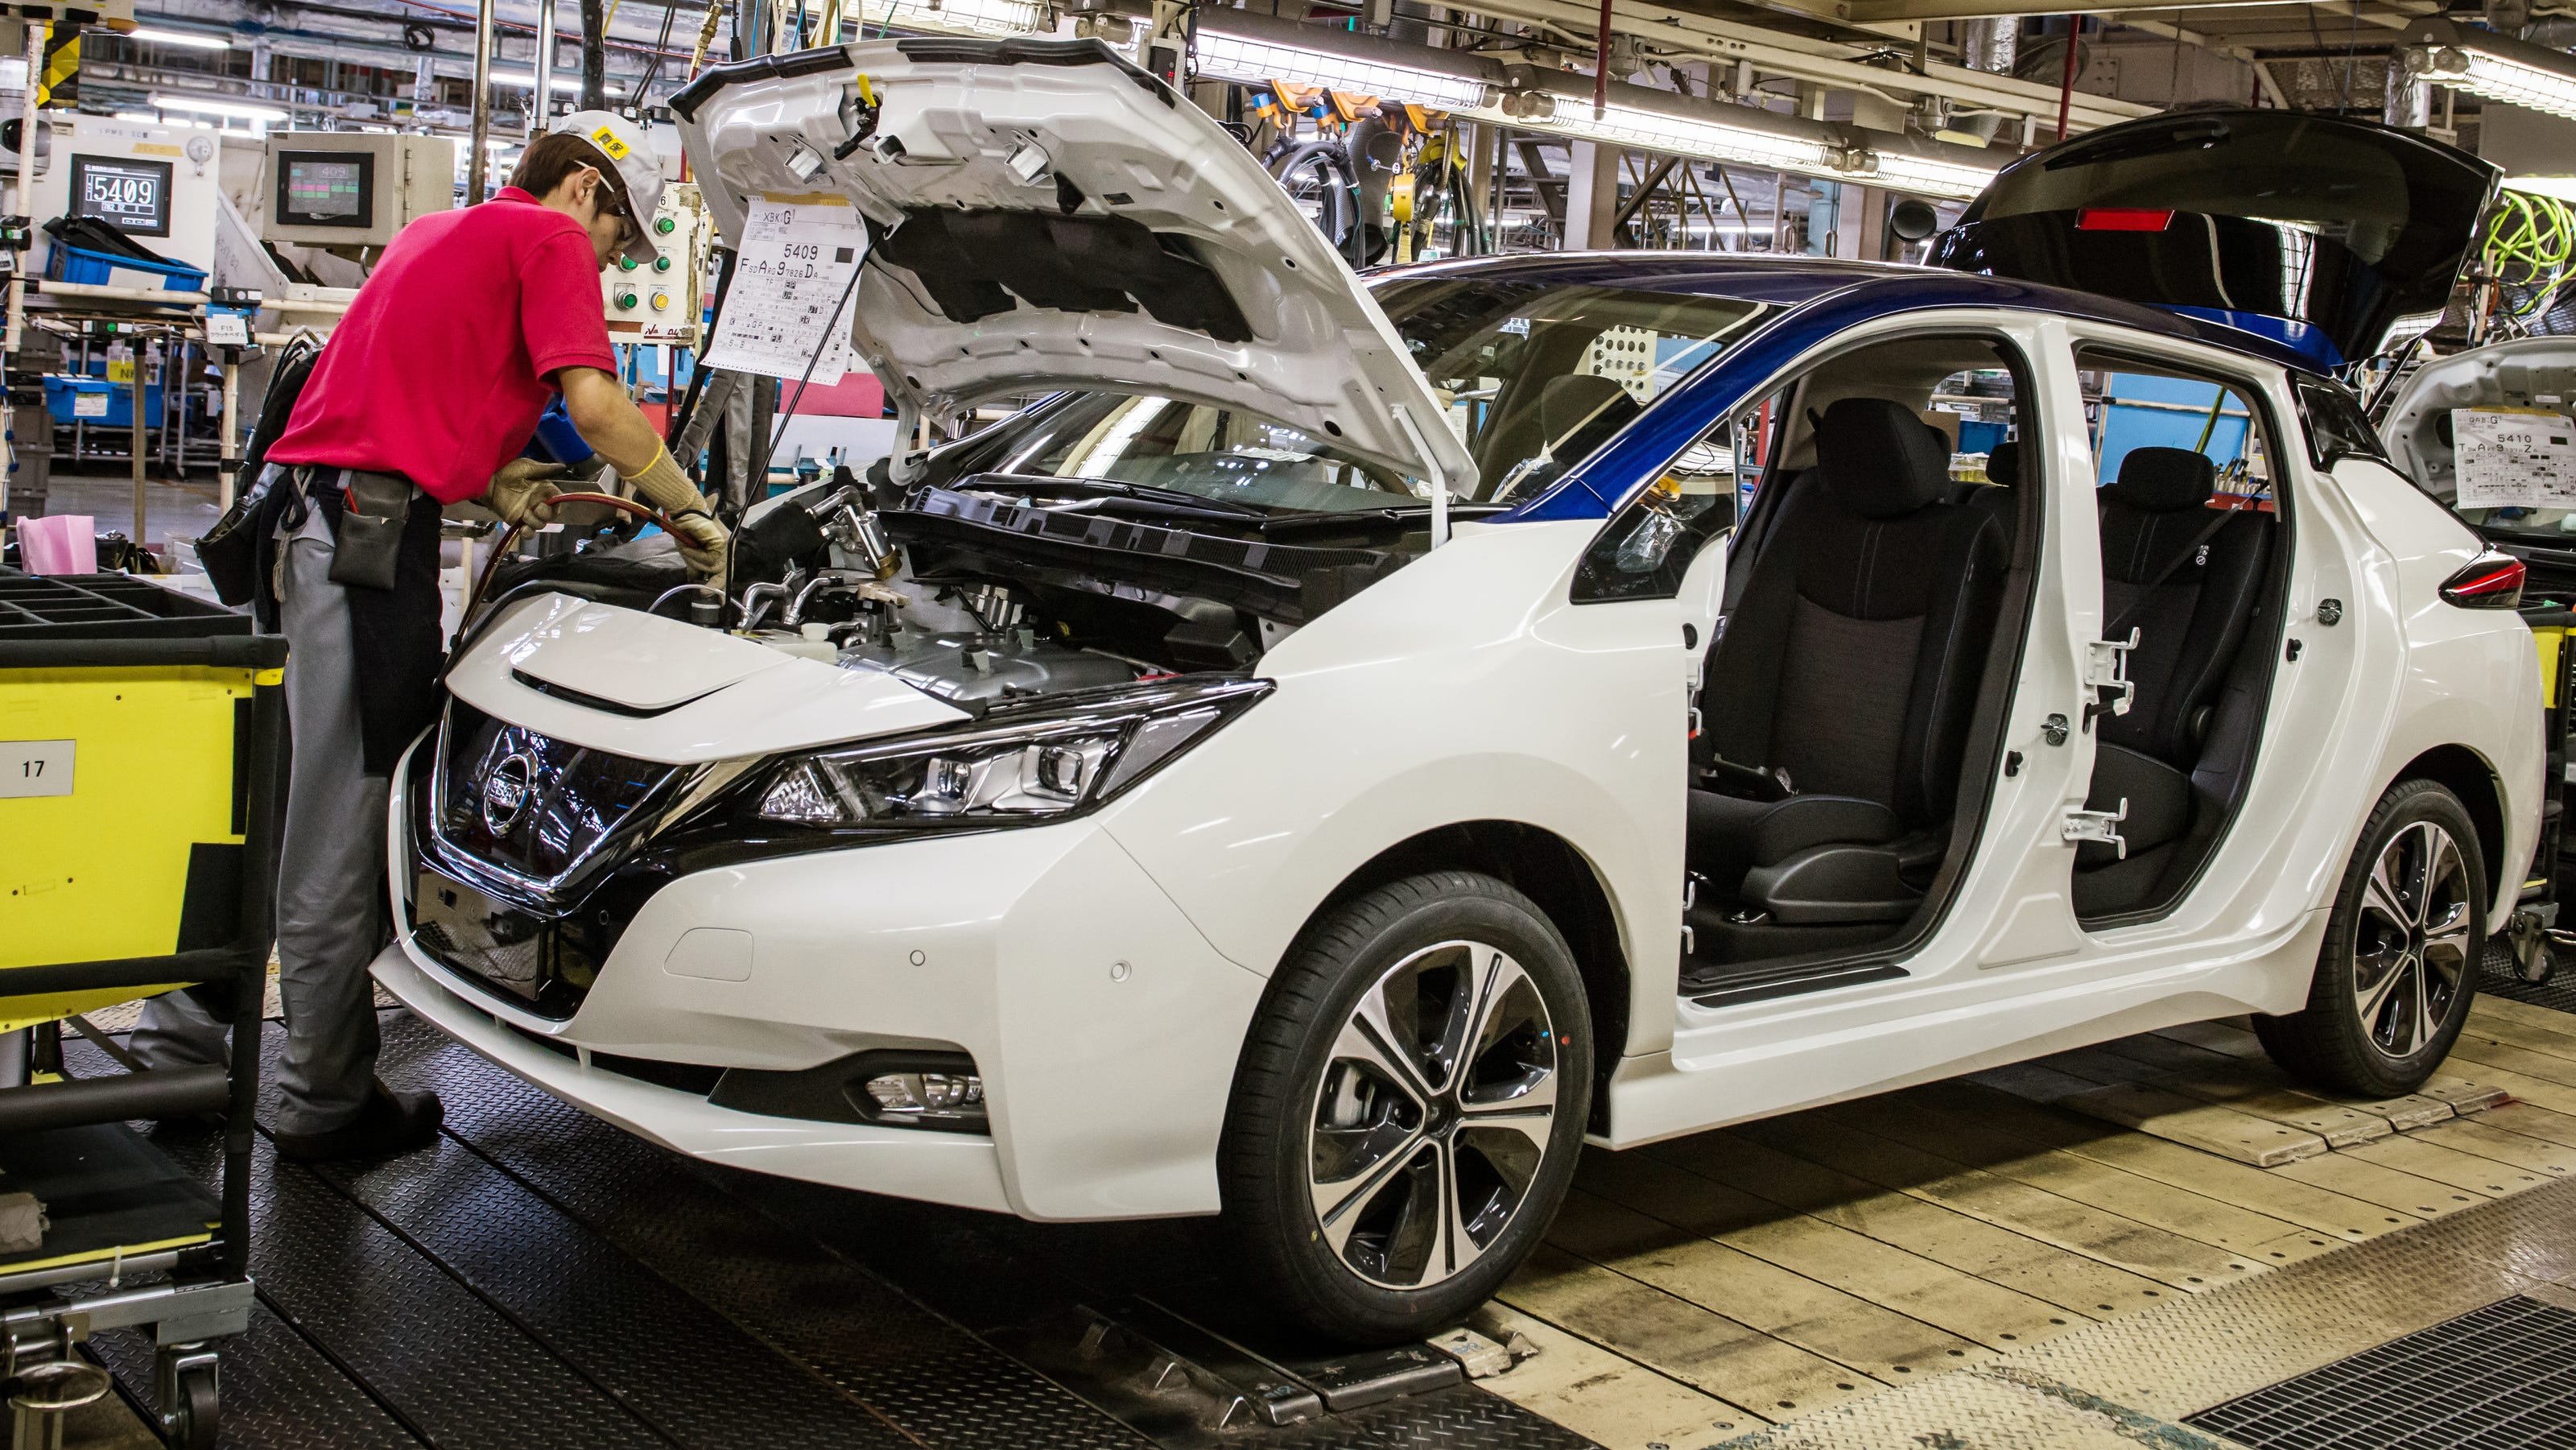 International automakers are driving economic growth in Tennessee | Opinion